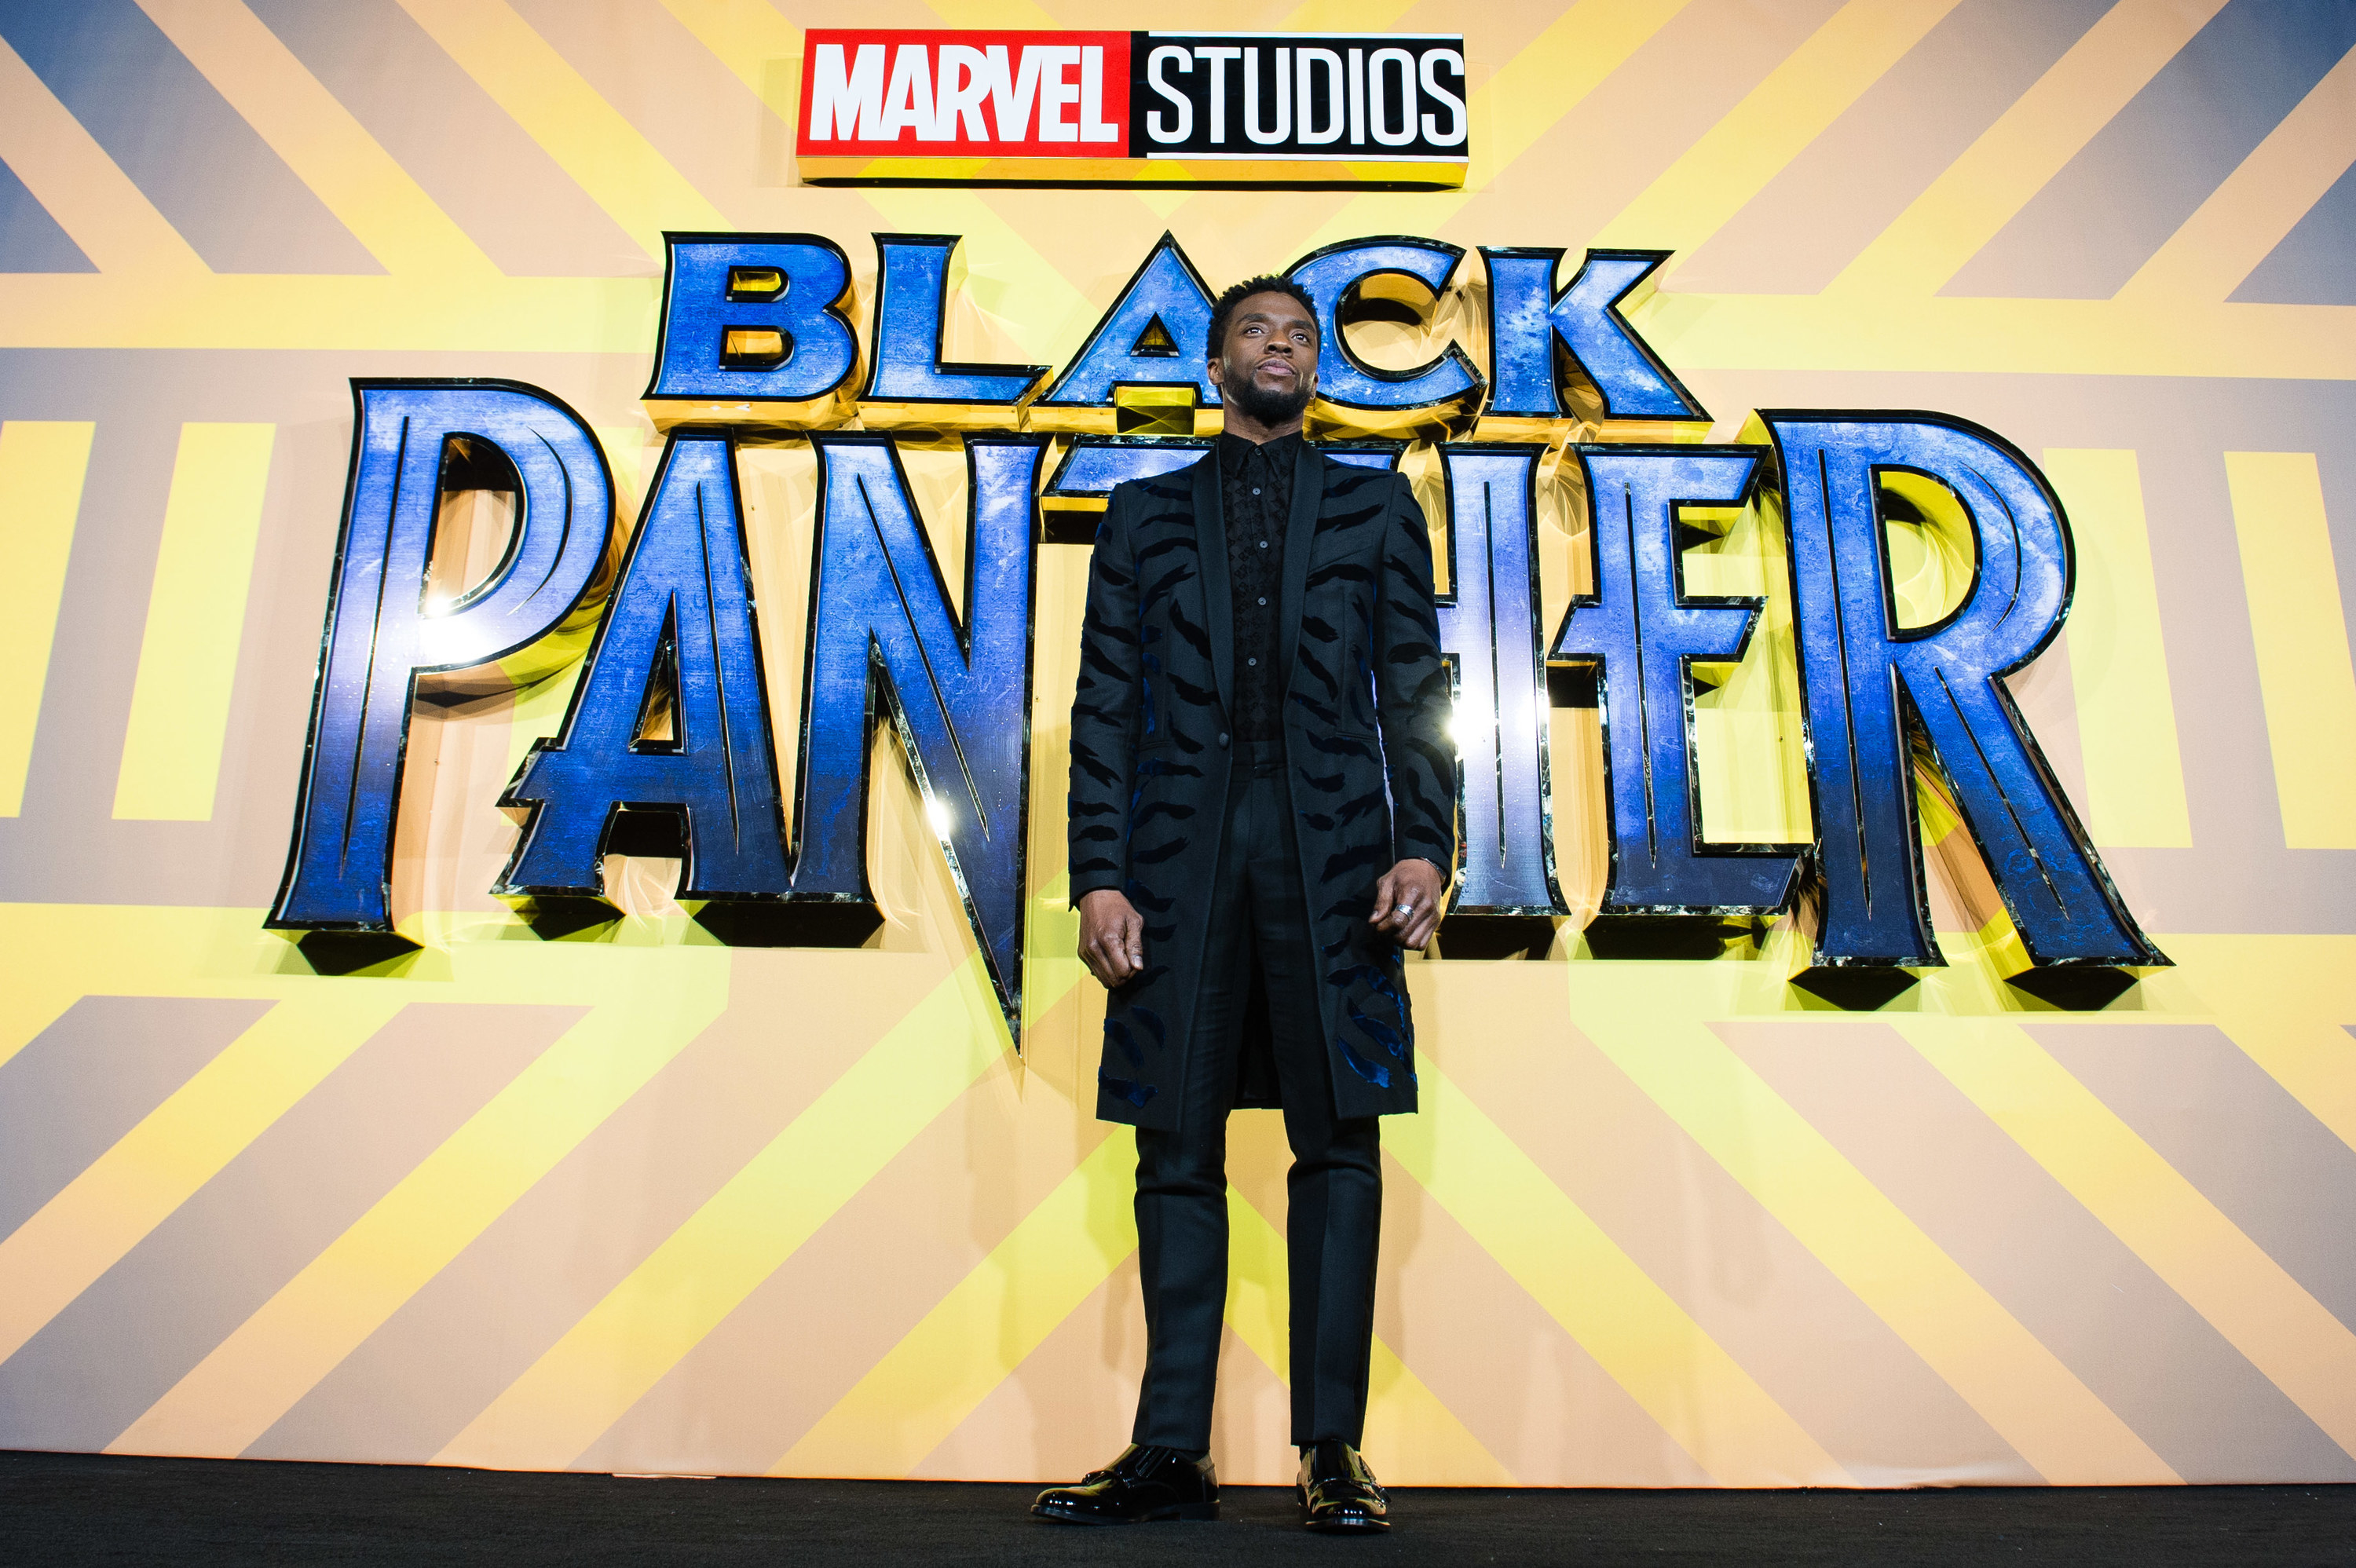 Chadwick stands in front of a large Black Panther poster